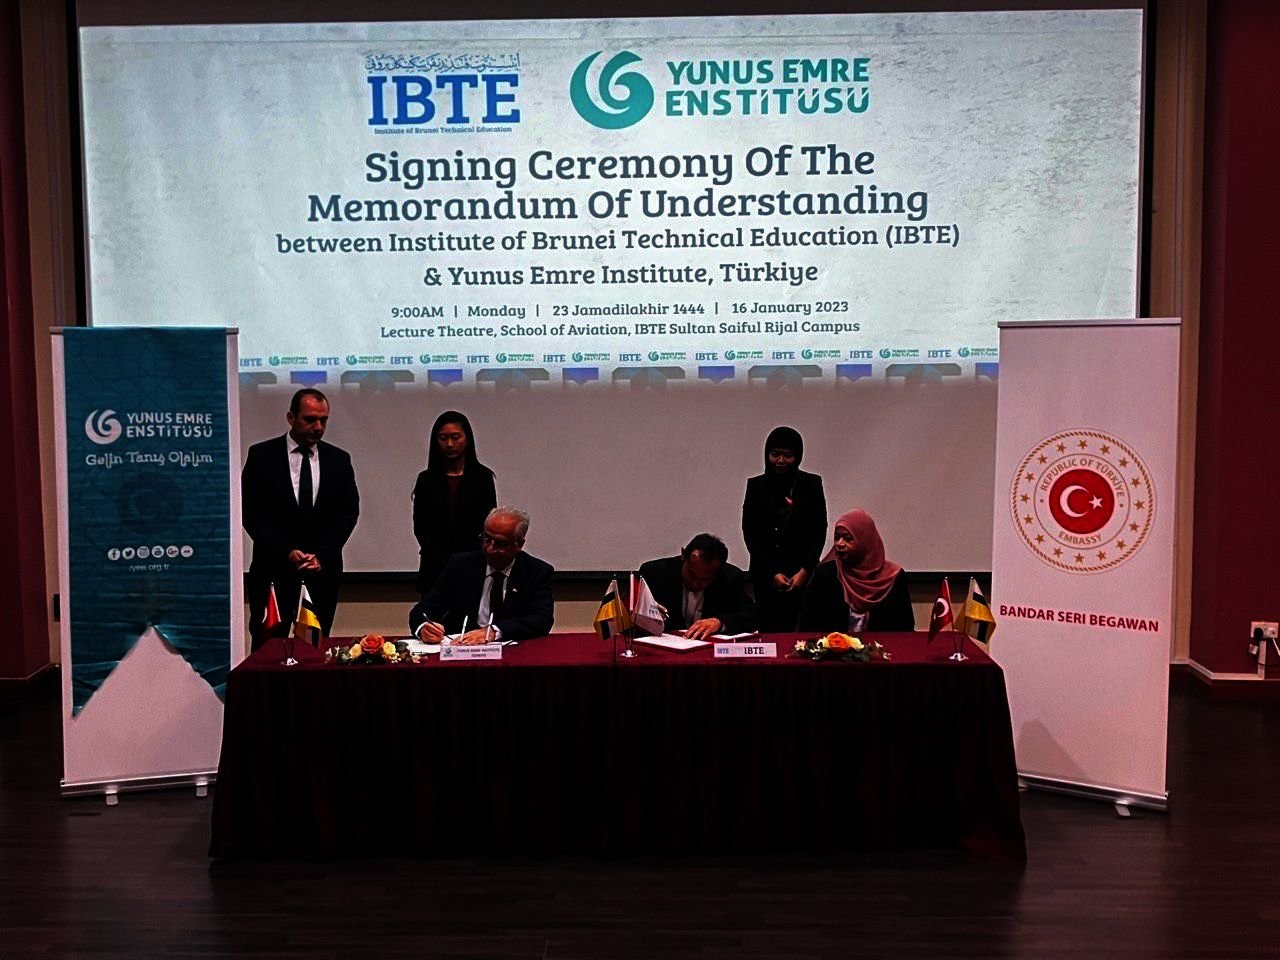 Professor Hamit Ersoy (L) and IBTE Technical Training Director Hj Zamri Hj Sabli (R) are seen during the MoU signing ceremony, Bandar Seri Begawan, Brunei, Jan. 16, 2023. (Courtesy of YEE)